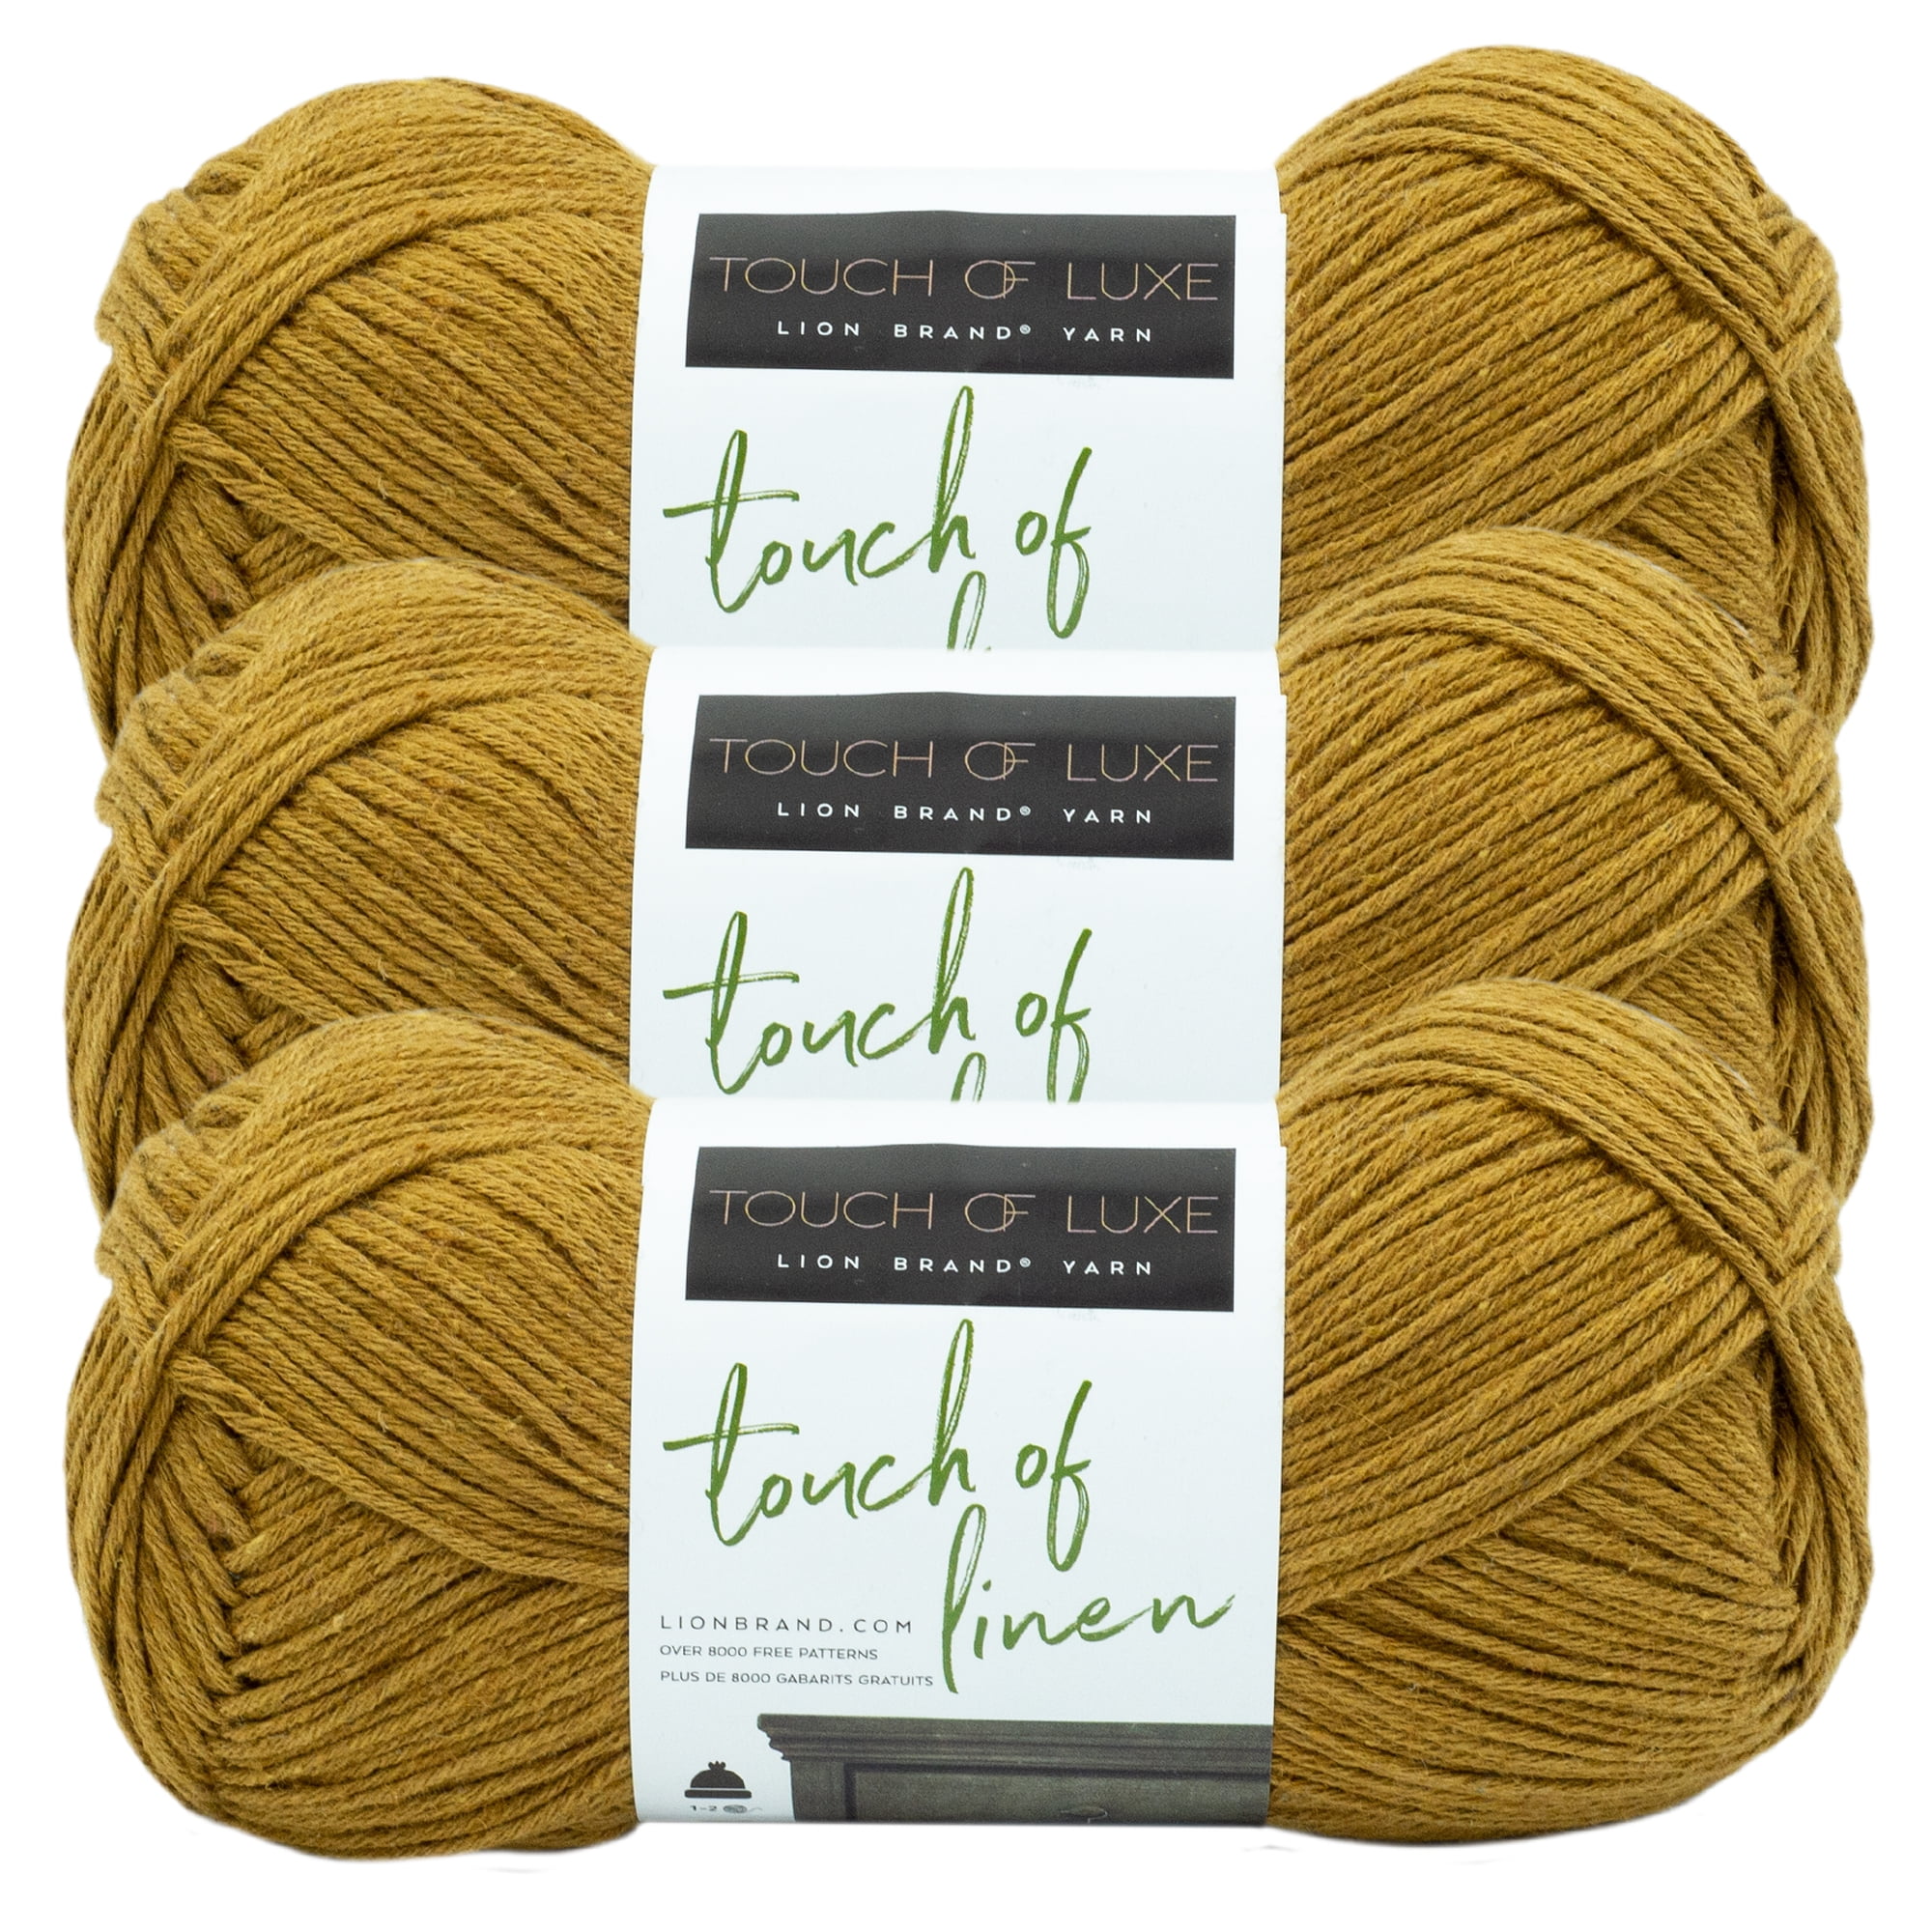 Lion Brand Yarn Touch of Linen Stone Touch of Luxe Collection Medium  Cotton, Linen Brown Yarn 3 Pack 